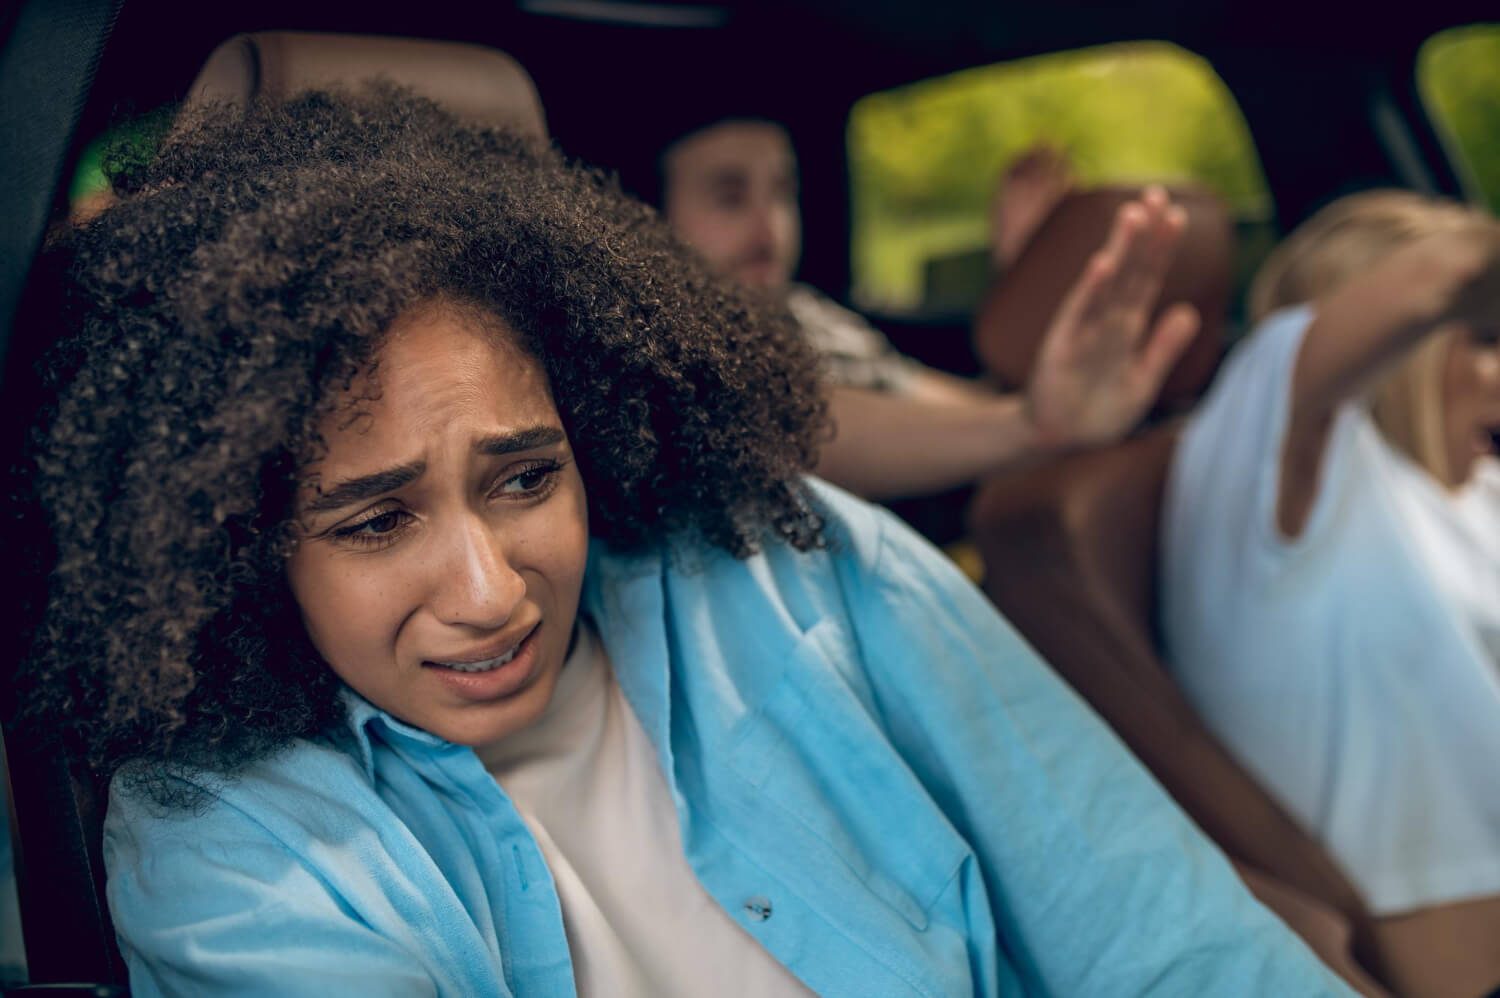 car accident girls car having car accident looking scared - Uber or Lyft Accident